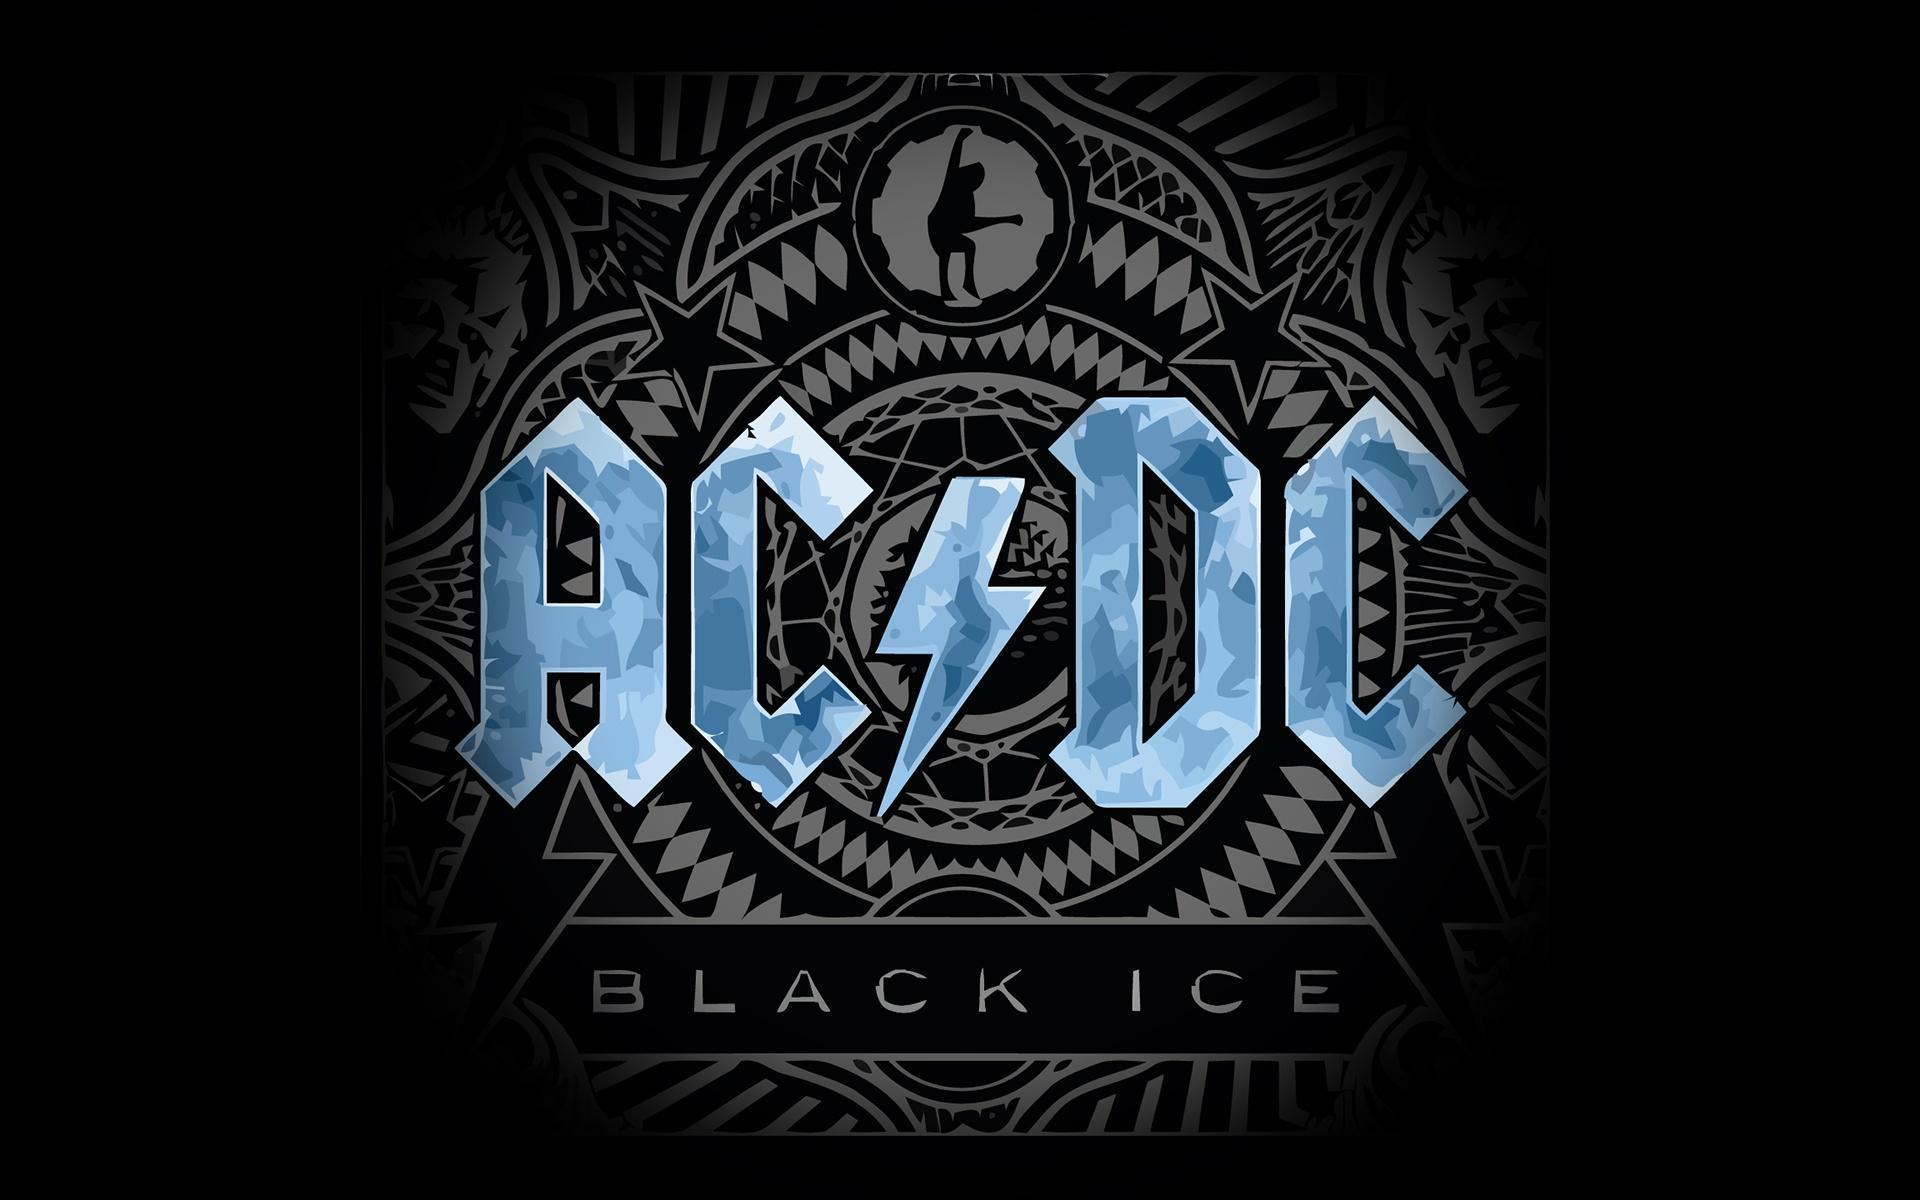 Acdc wallpapers for desktop download free Acdc pictures and backgrounds  for PC  moborg